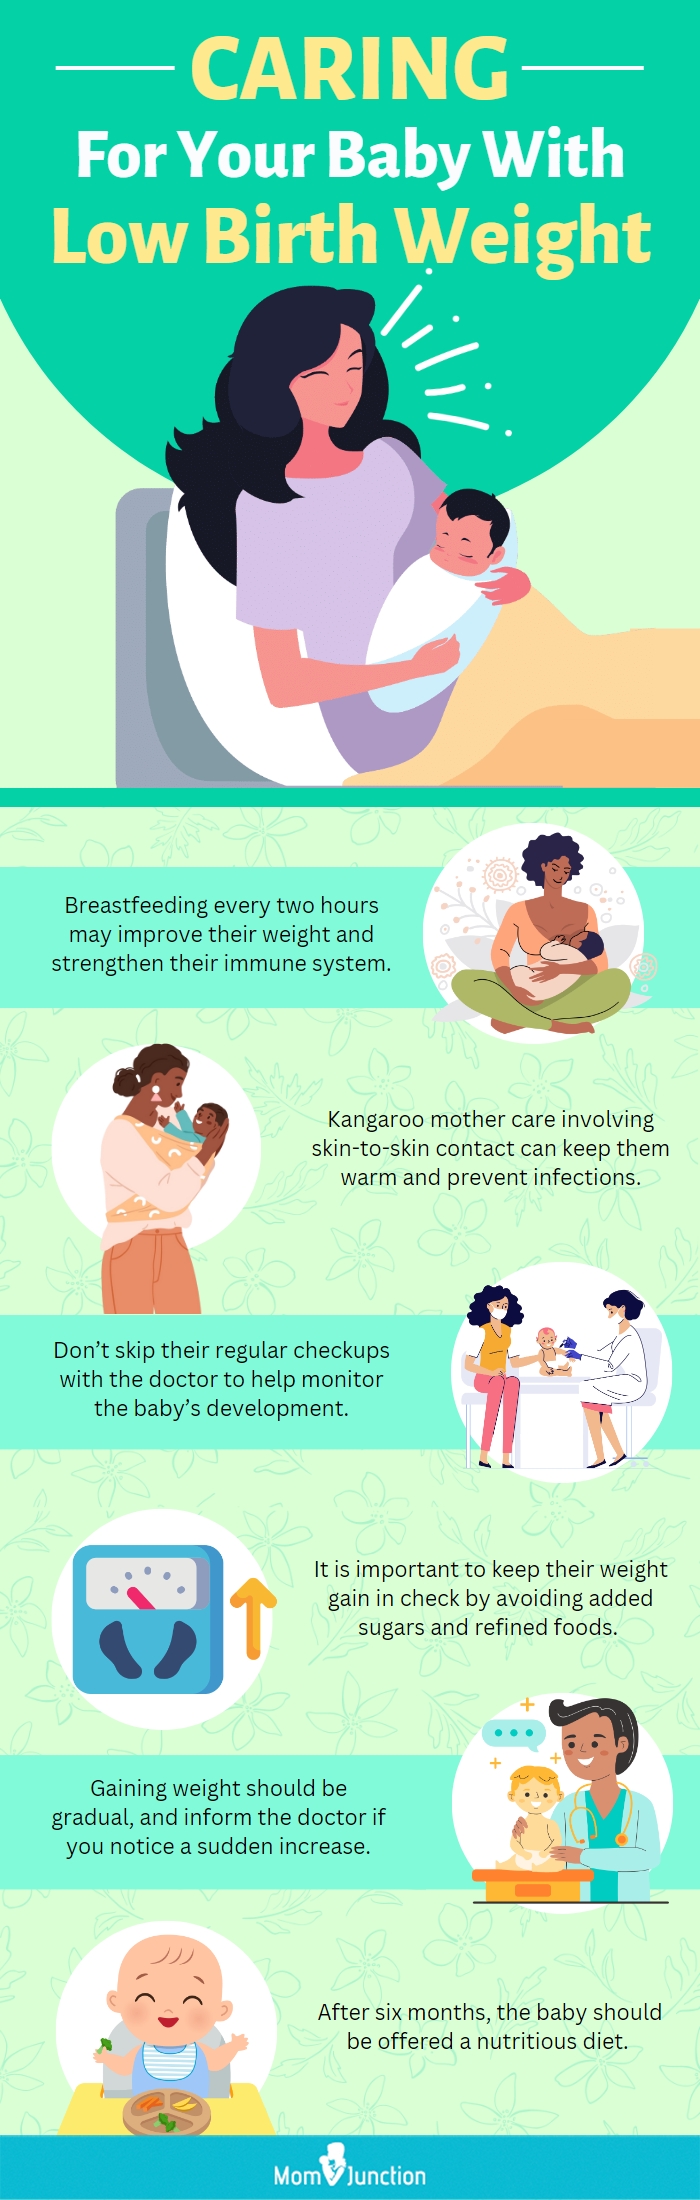 caring for your baby with low birth weight [infographic]